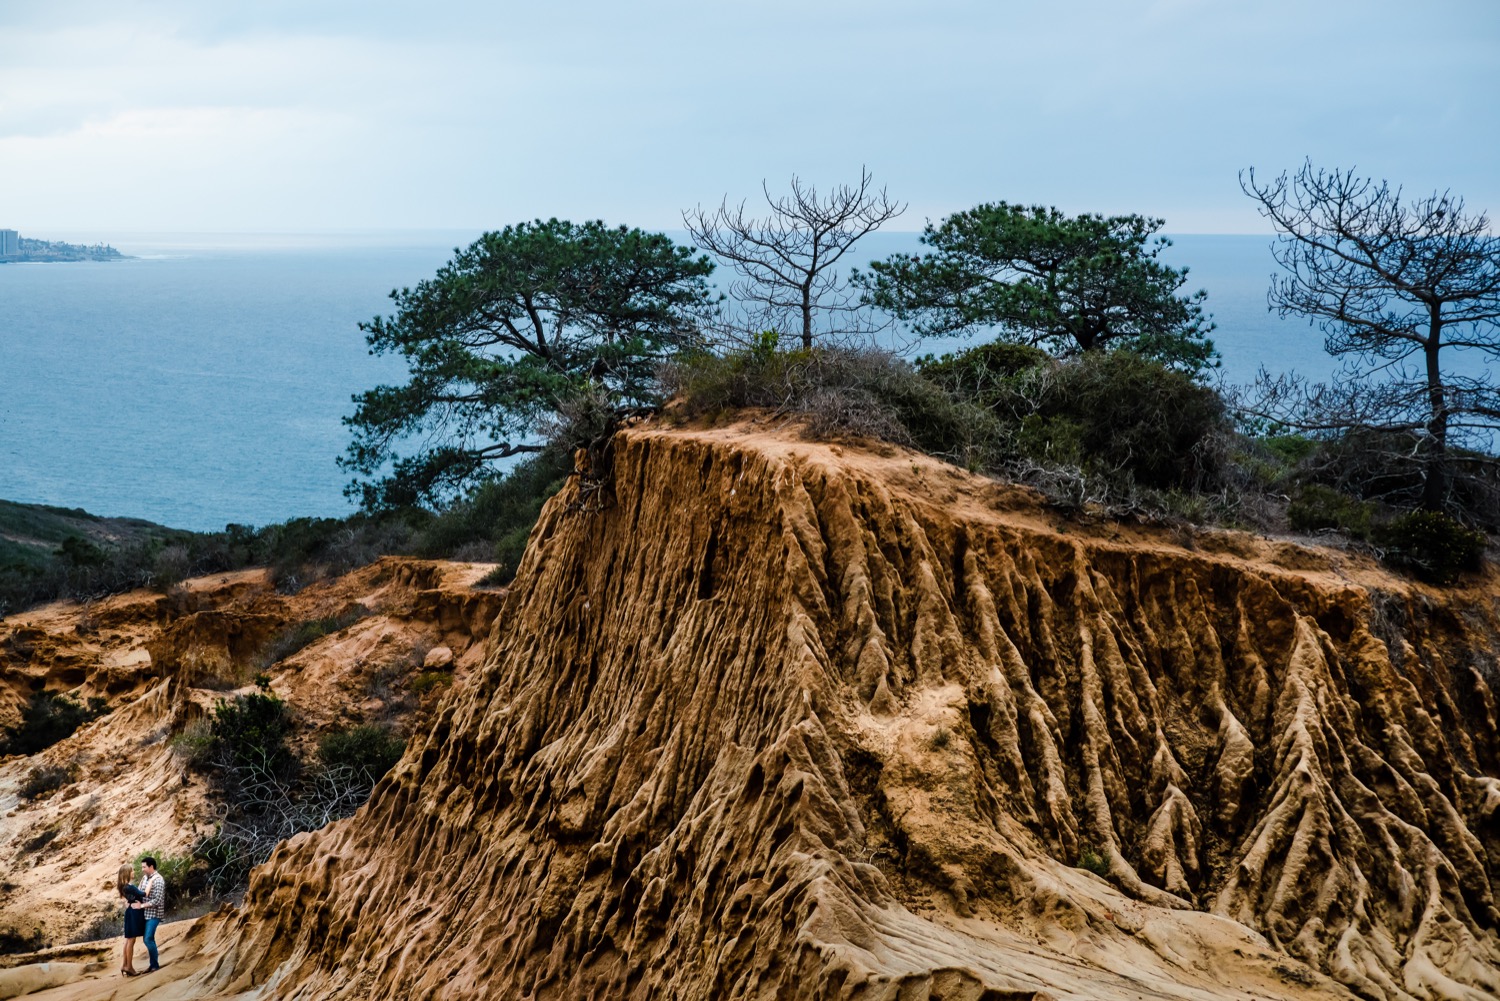 Torrey Pines State Reserve Engagement Photography